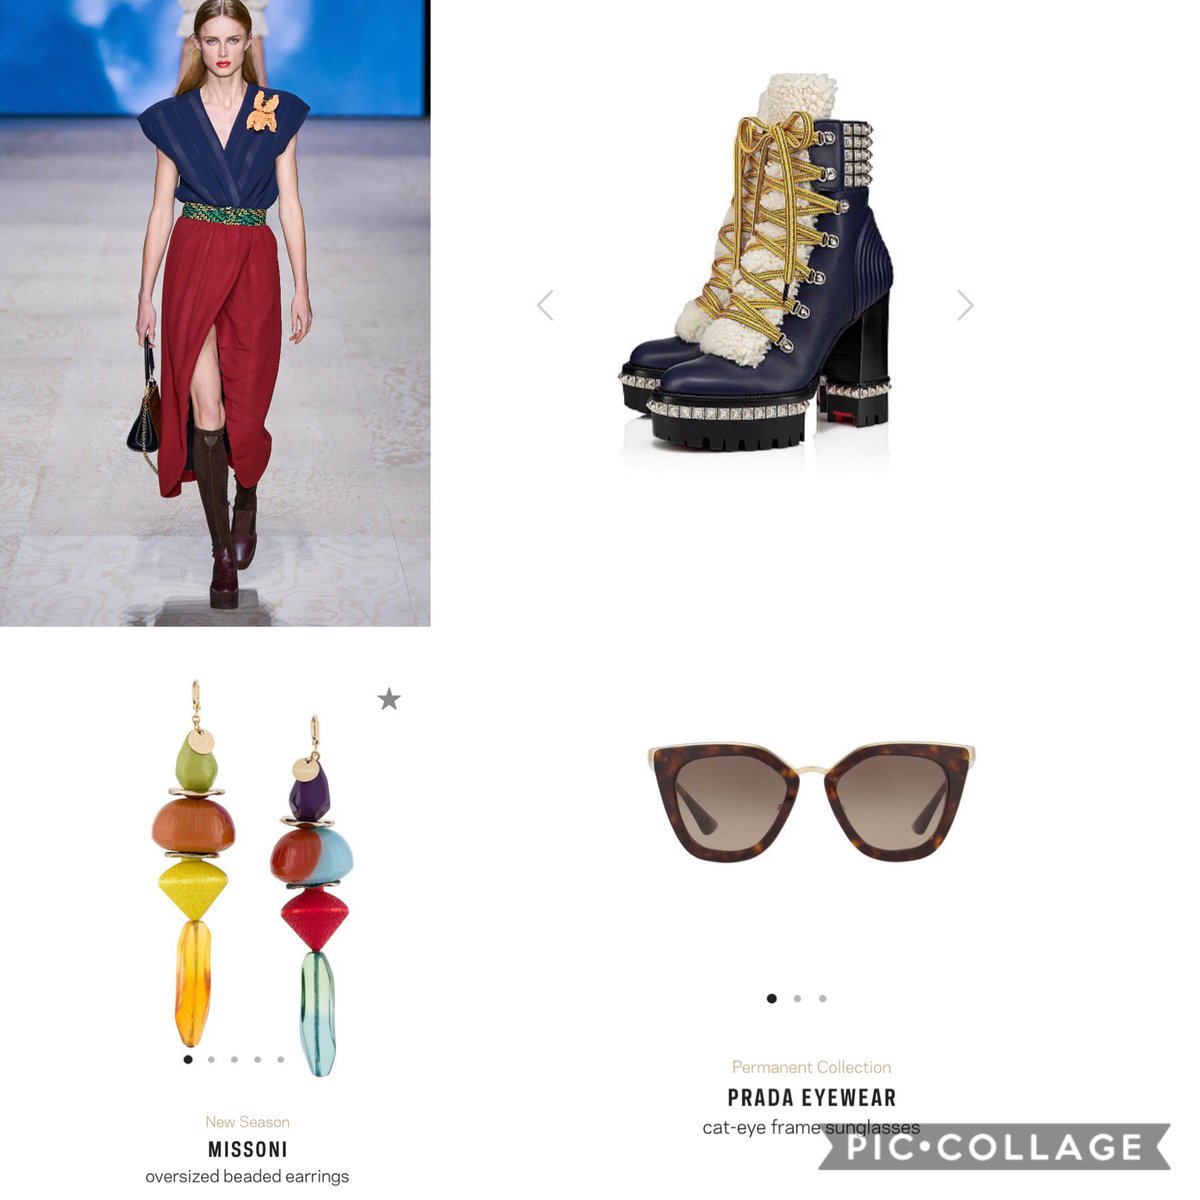 Cannes 2020 Wishlist (hypothetical) threadDeepika Padukone Day 2 Look 2There had to be a customary Louis Vuitton look. I picked this colour block-y wrap dress with these Louboutin boots. It’ll be a messy look that will divide the critics. Adding these fun Missoni trinkets.